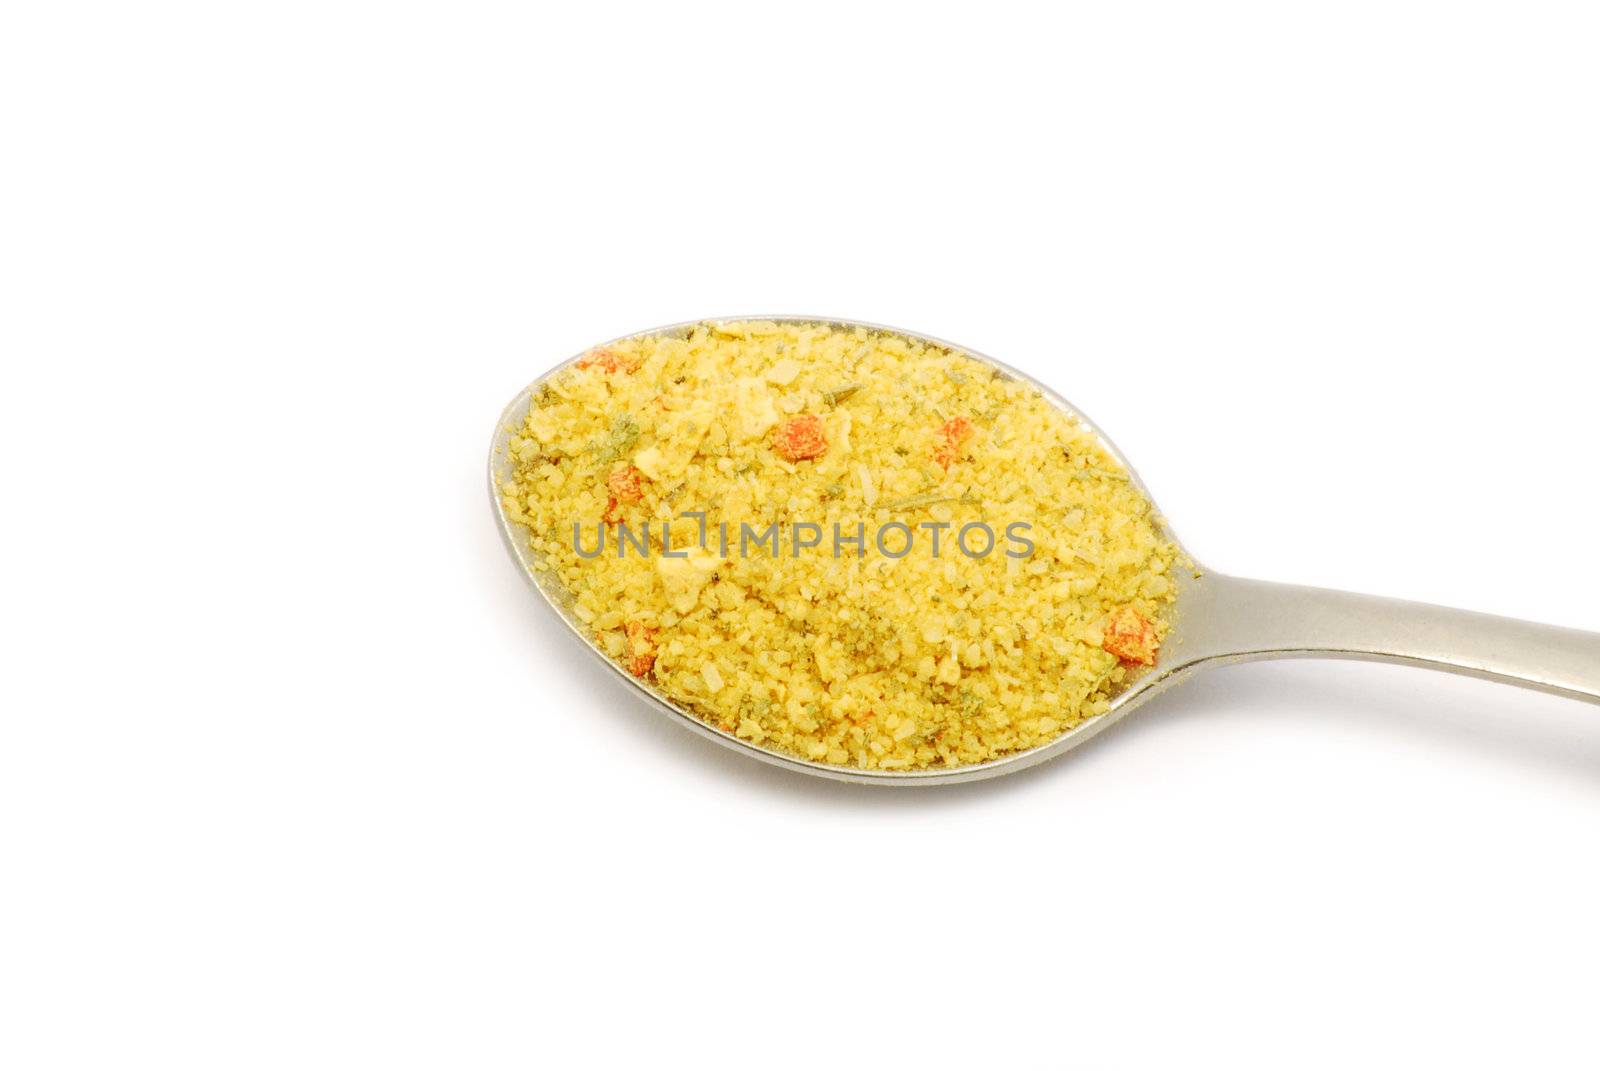 Spices on a silver spoon on white background